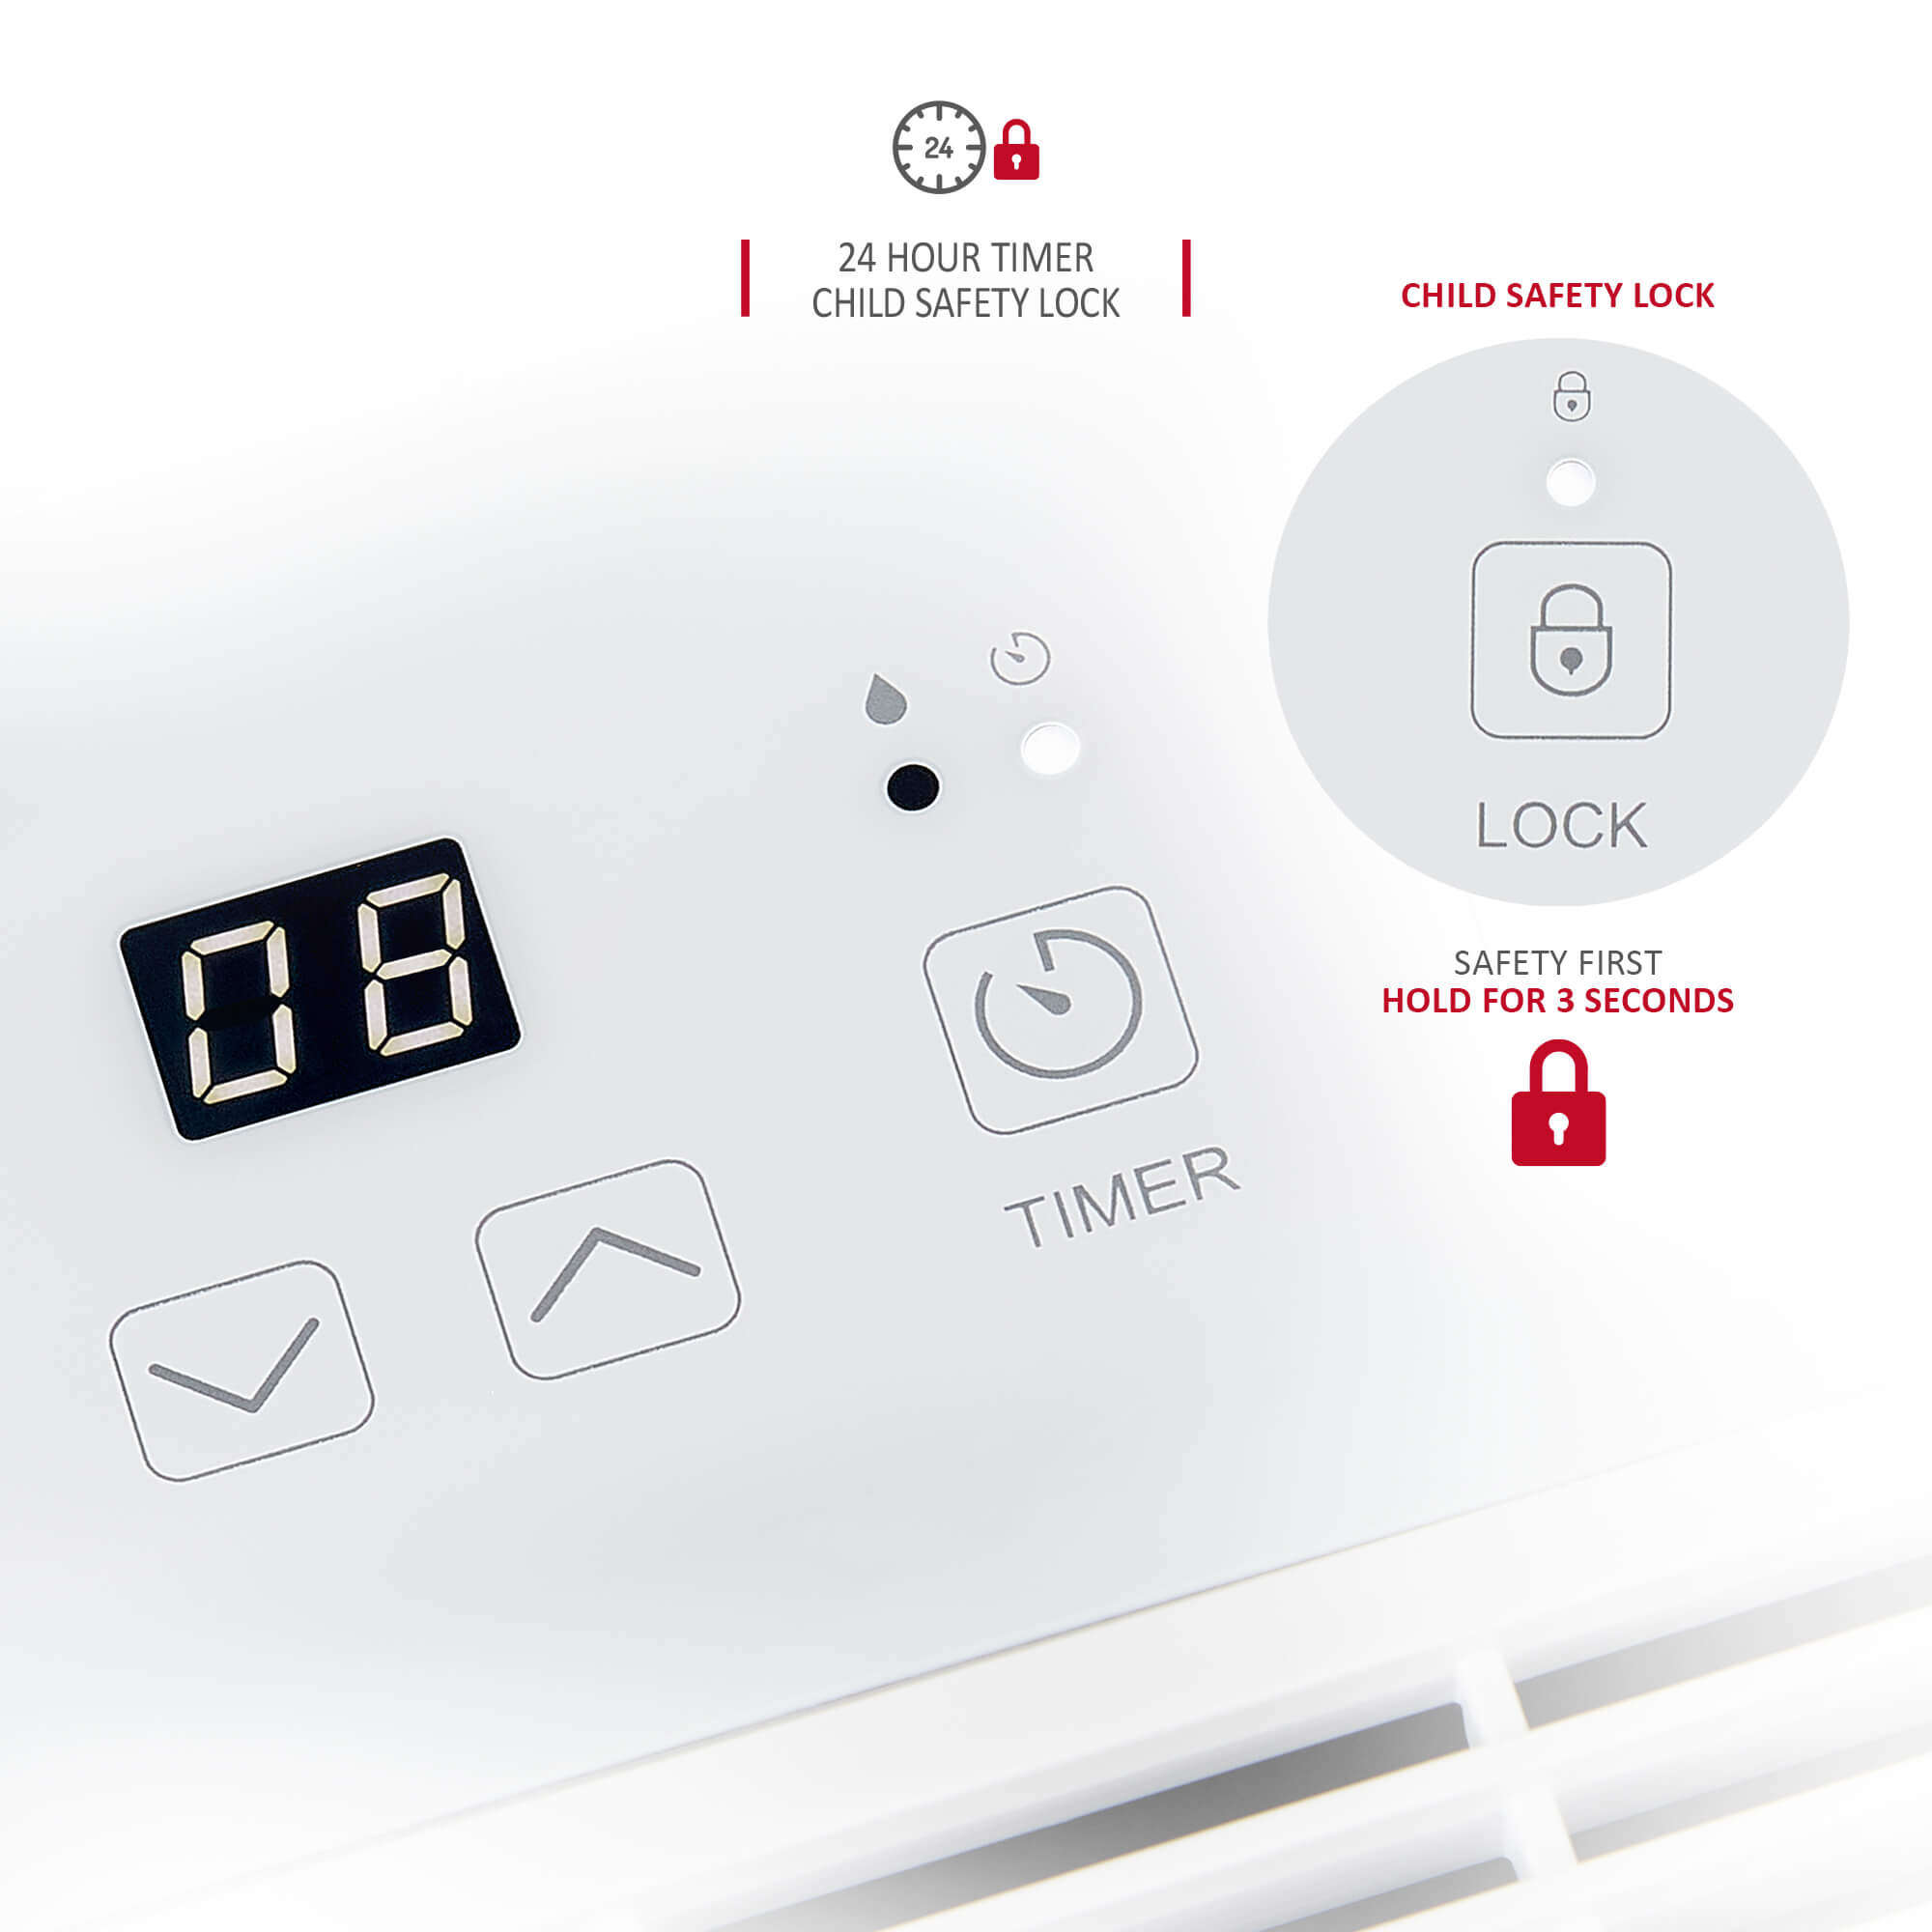 NETTA 20L Low Energy Dehumidifier Continuous Drainage Timer - Ideal for Damp, Condensation and Laundry Drying